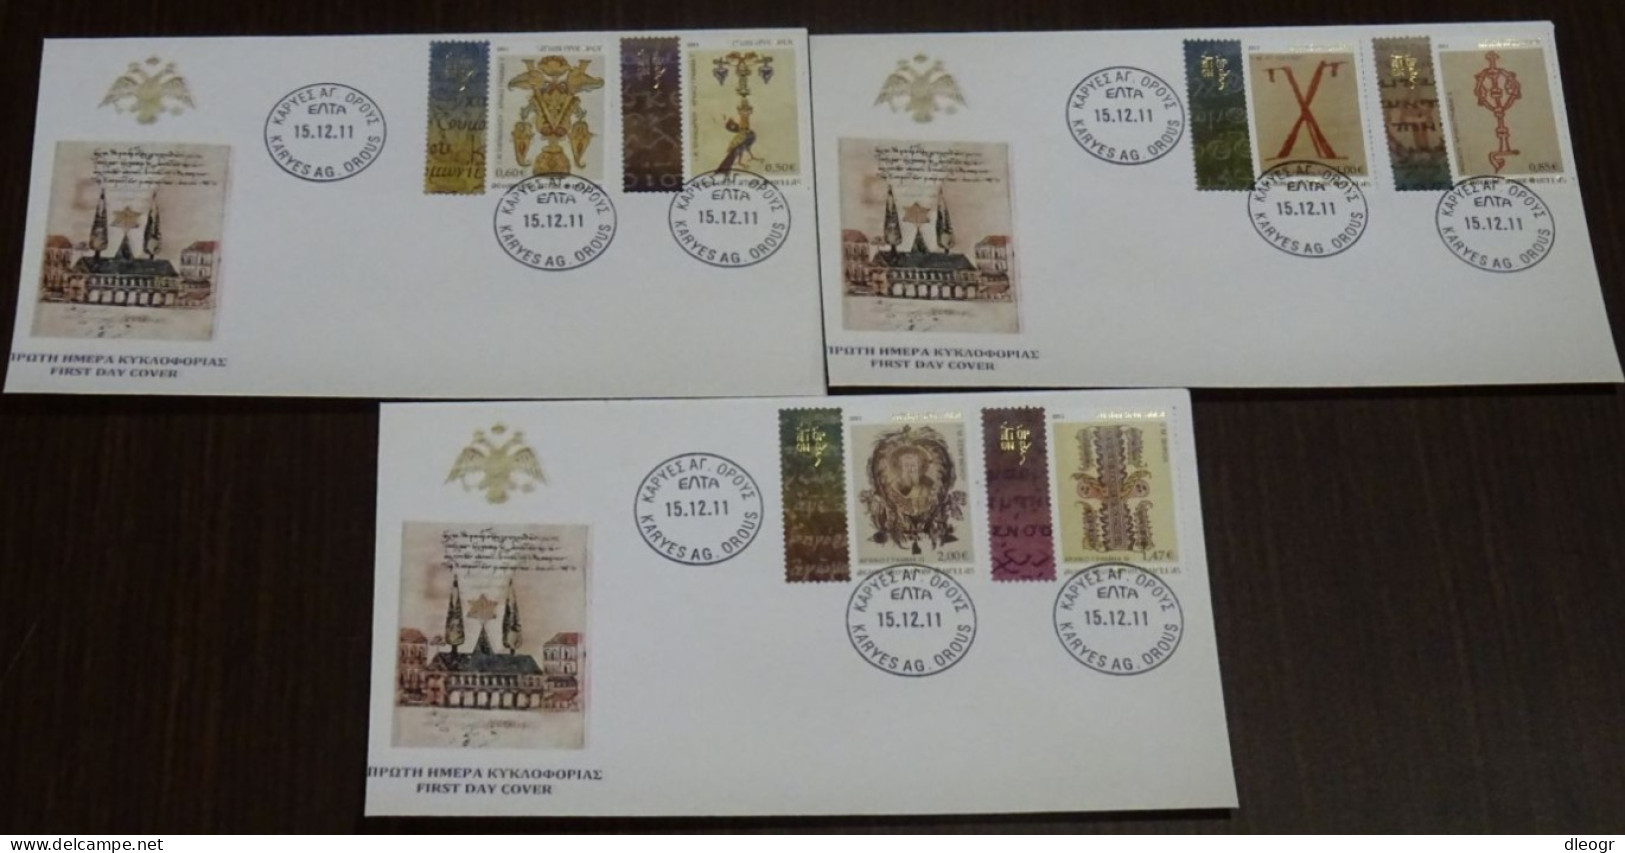 Greece Mount Athos 2011 Initial Letters IV Unofficial FDC - FDC